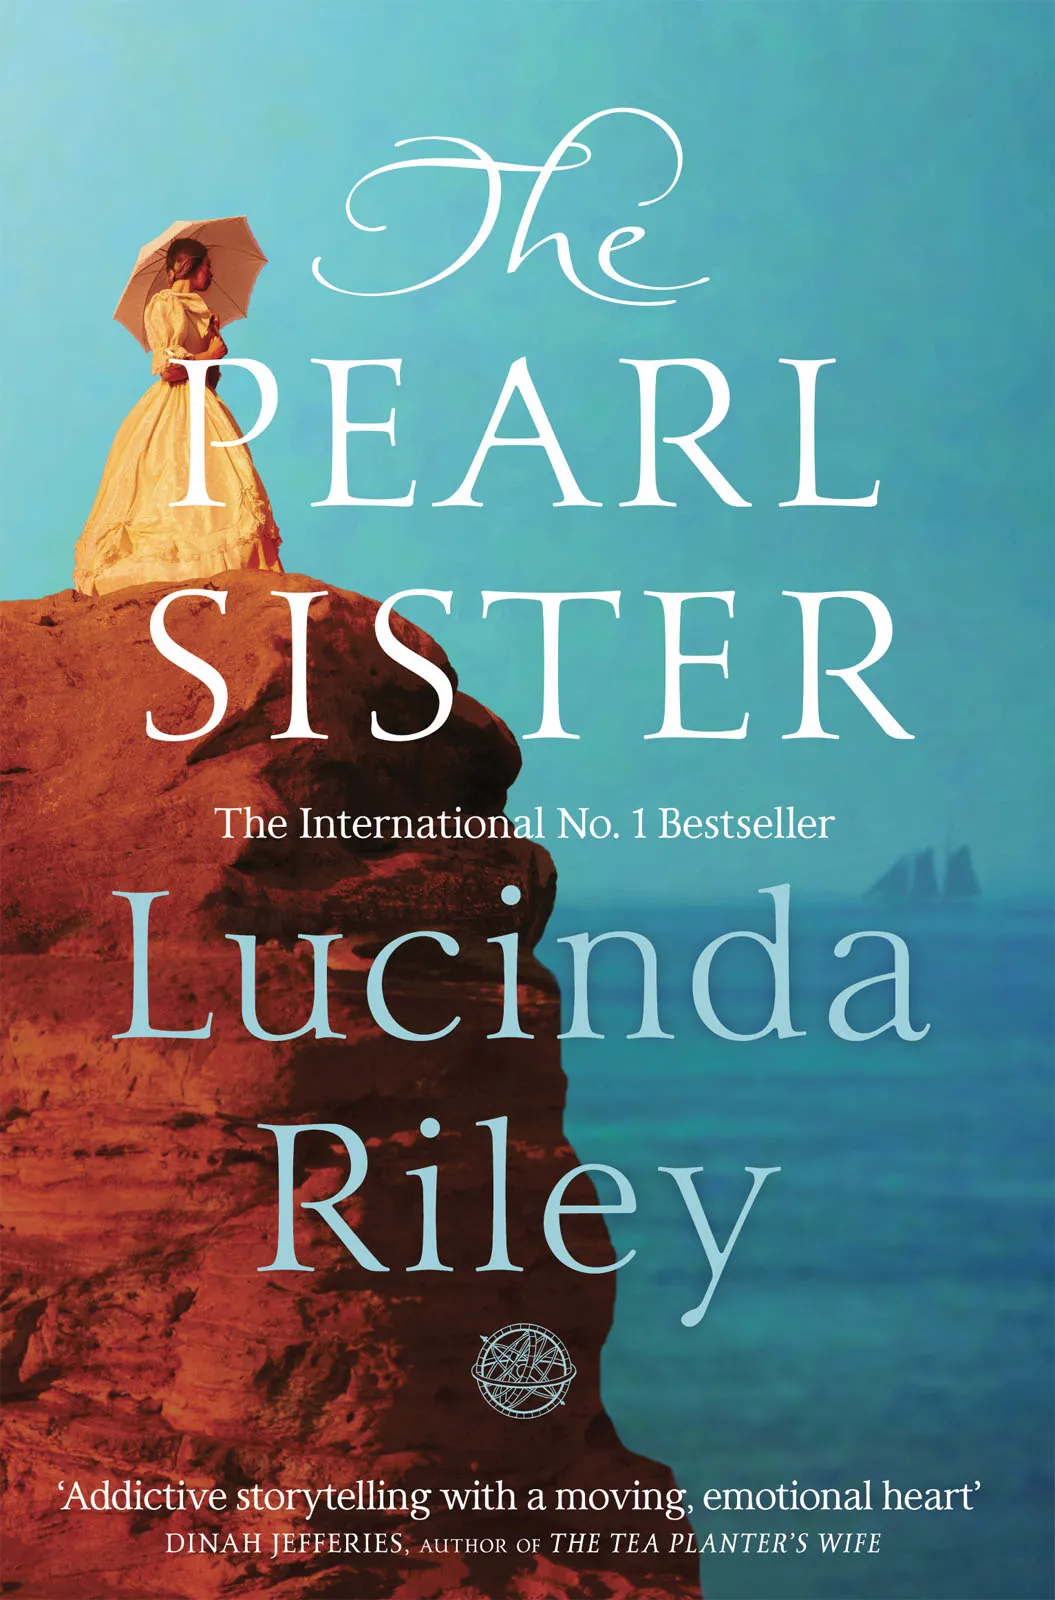 The Pearl Sister (The Seven Sisters #4)